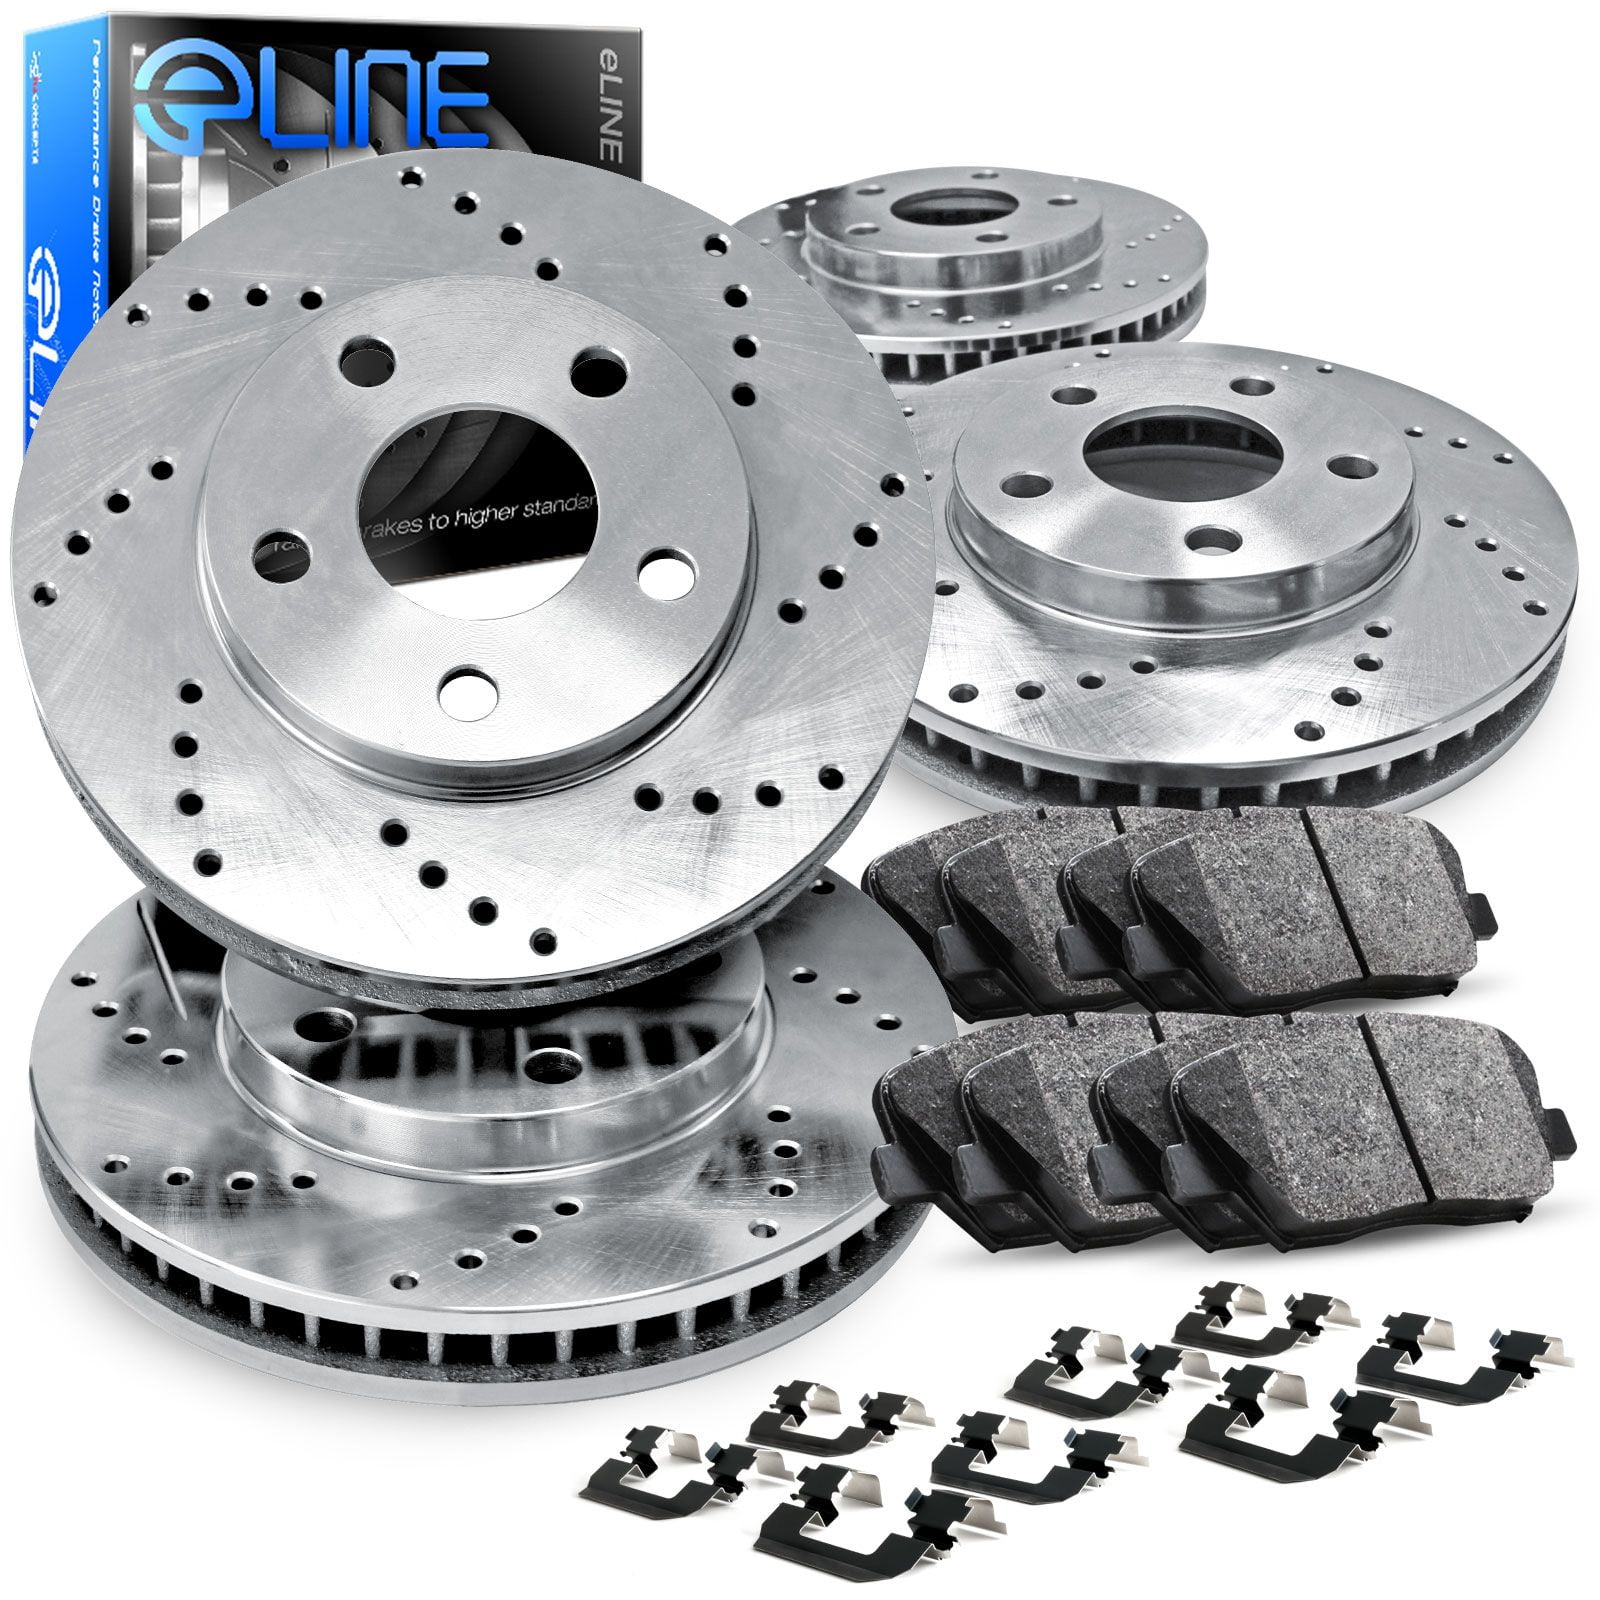 Fit Land Rover Range Rover Evoque Front Rear  Drilled Brake Rotors+Ceramic Pads